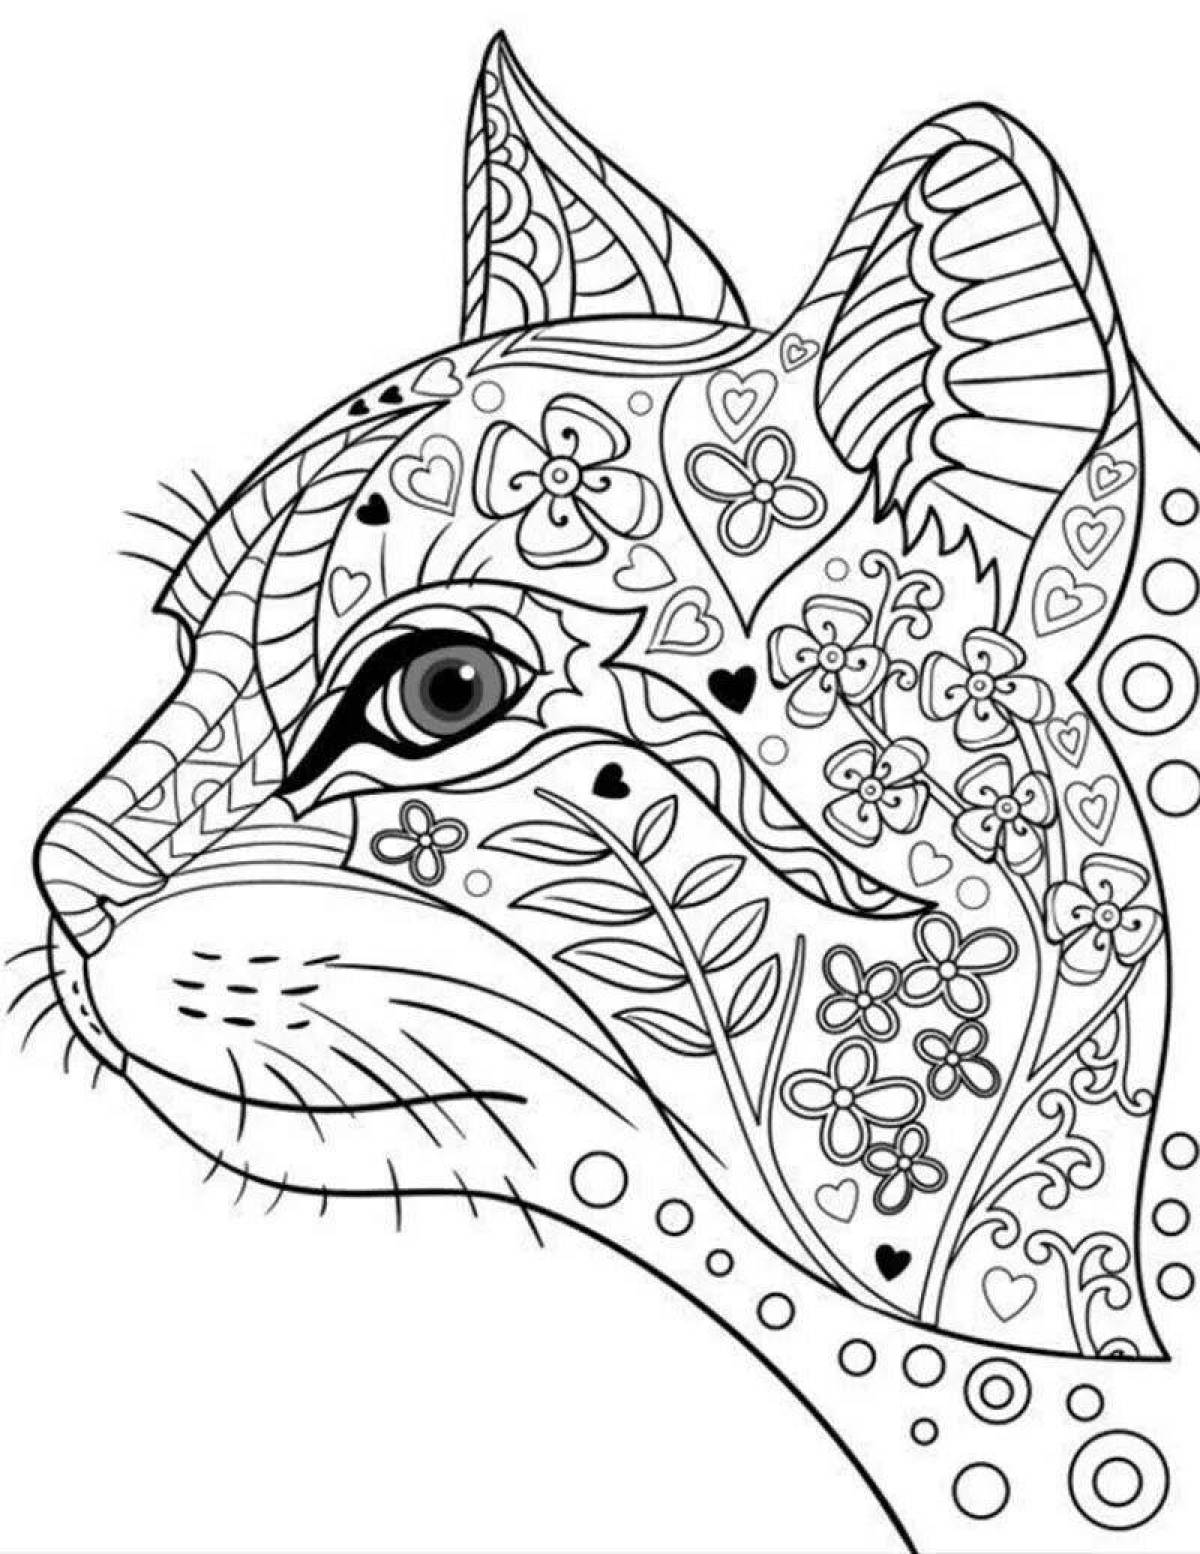 Coloring page adorable 10 year old animals